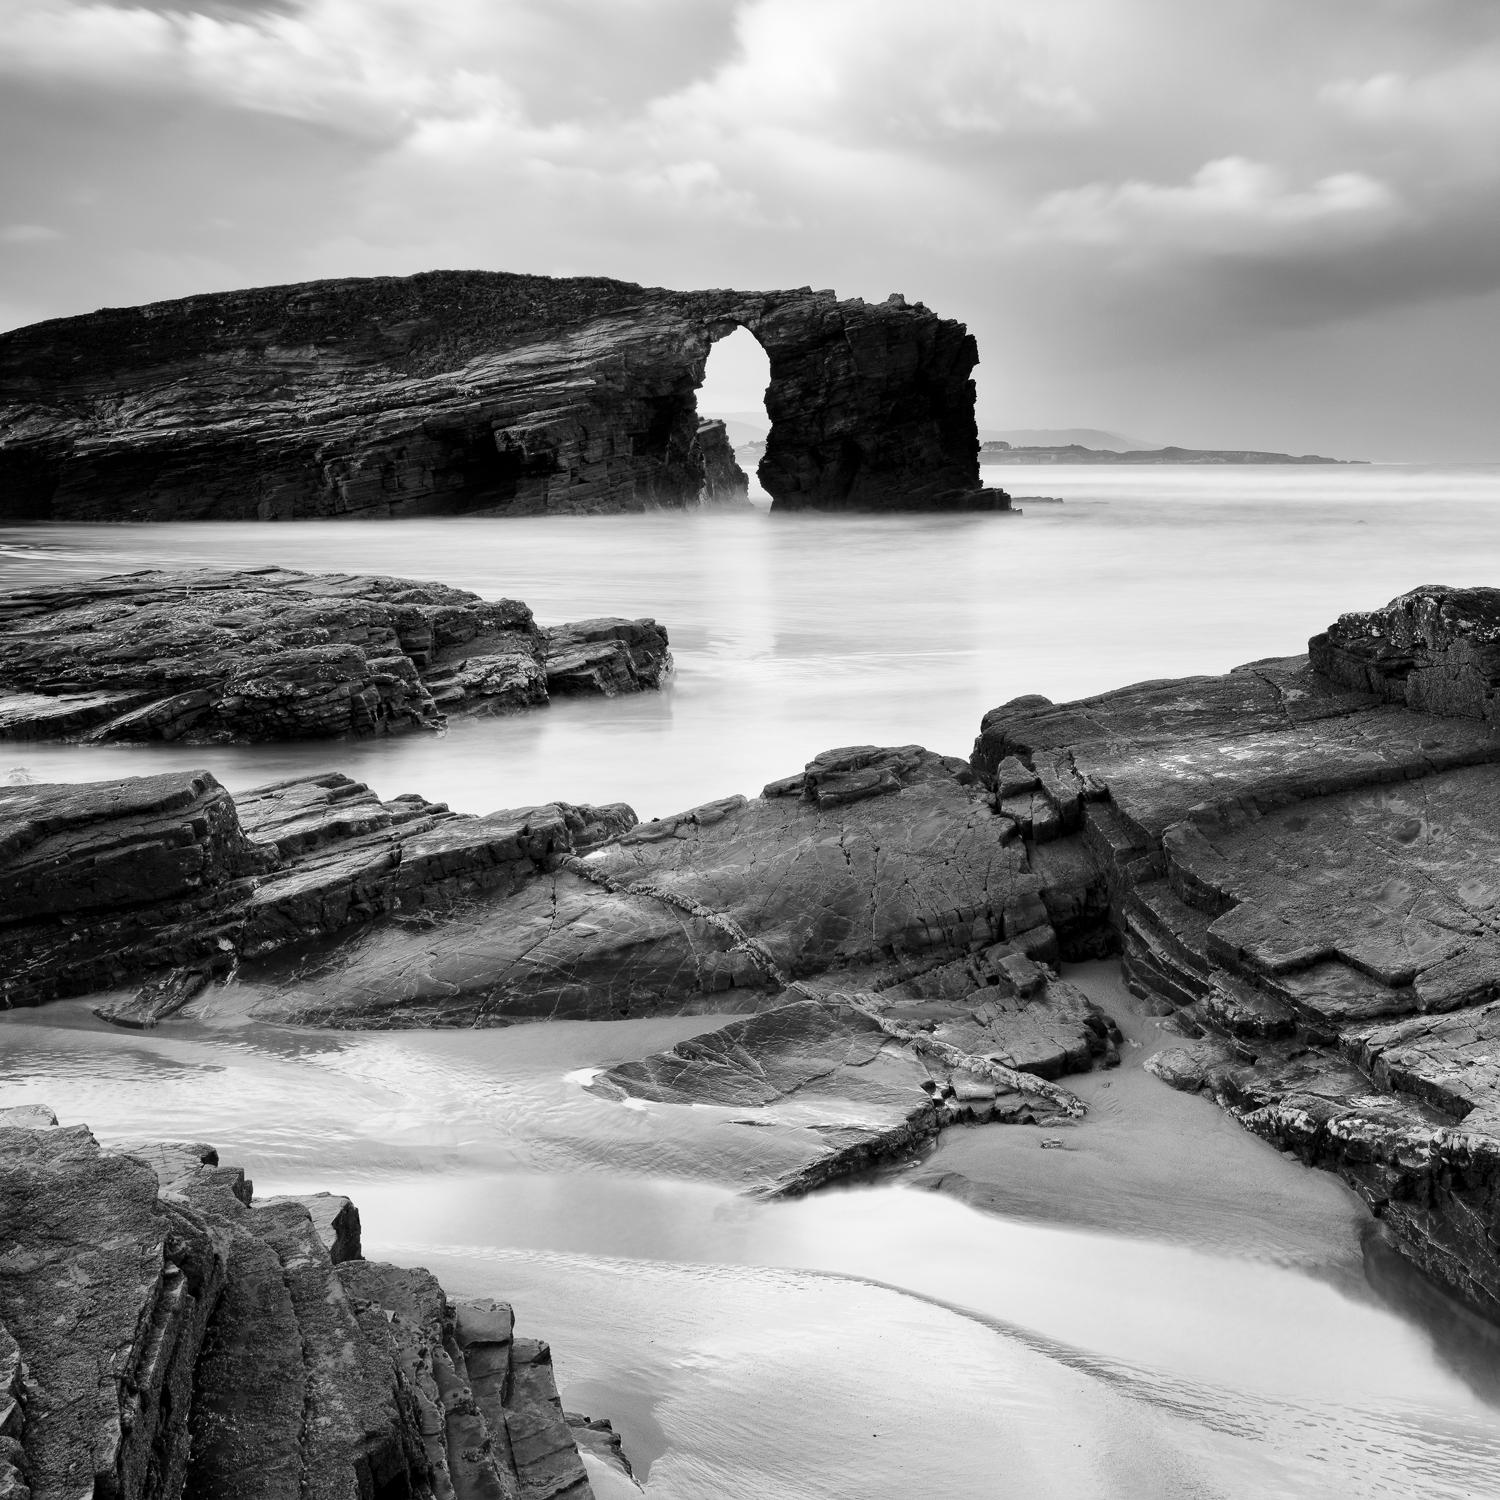  As Catedrais Beach, black and white photography, waterscape, landscape, framed - Contemporary Photograph by Gerald Berghammer